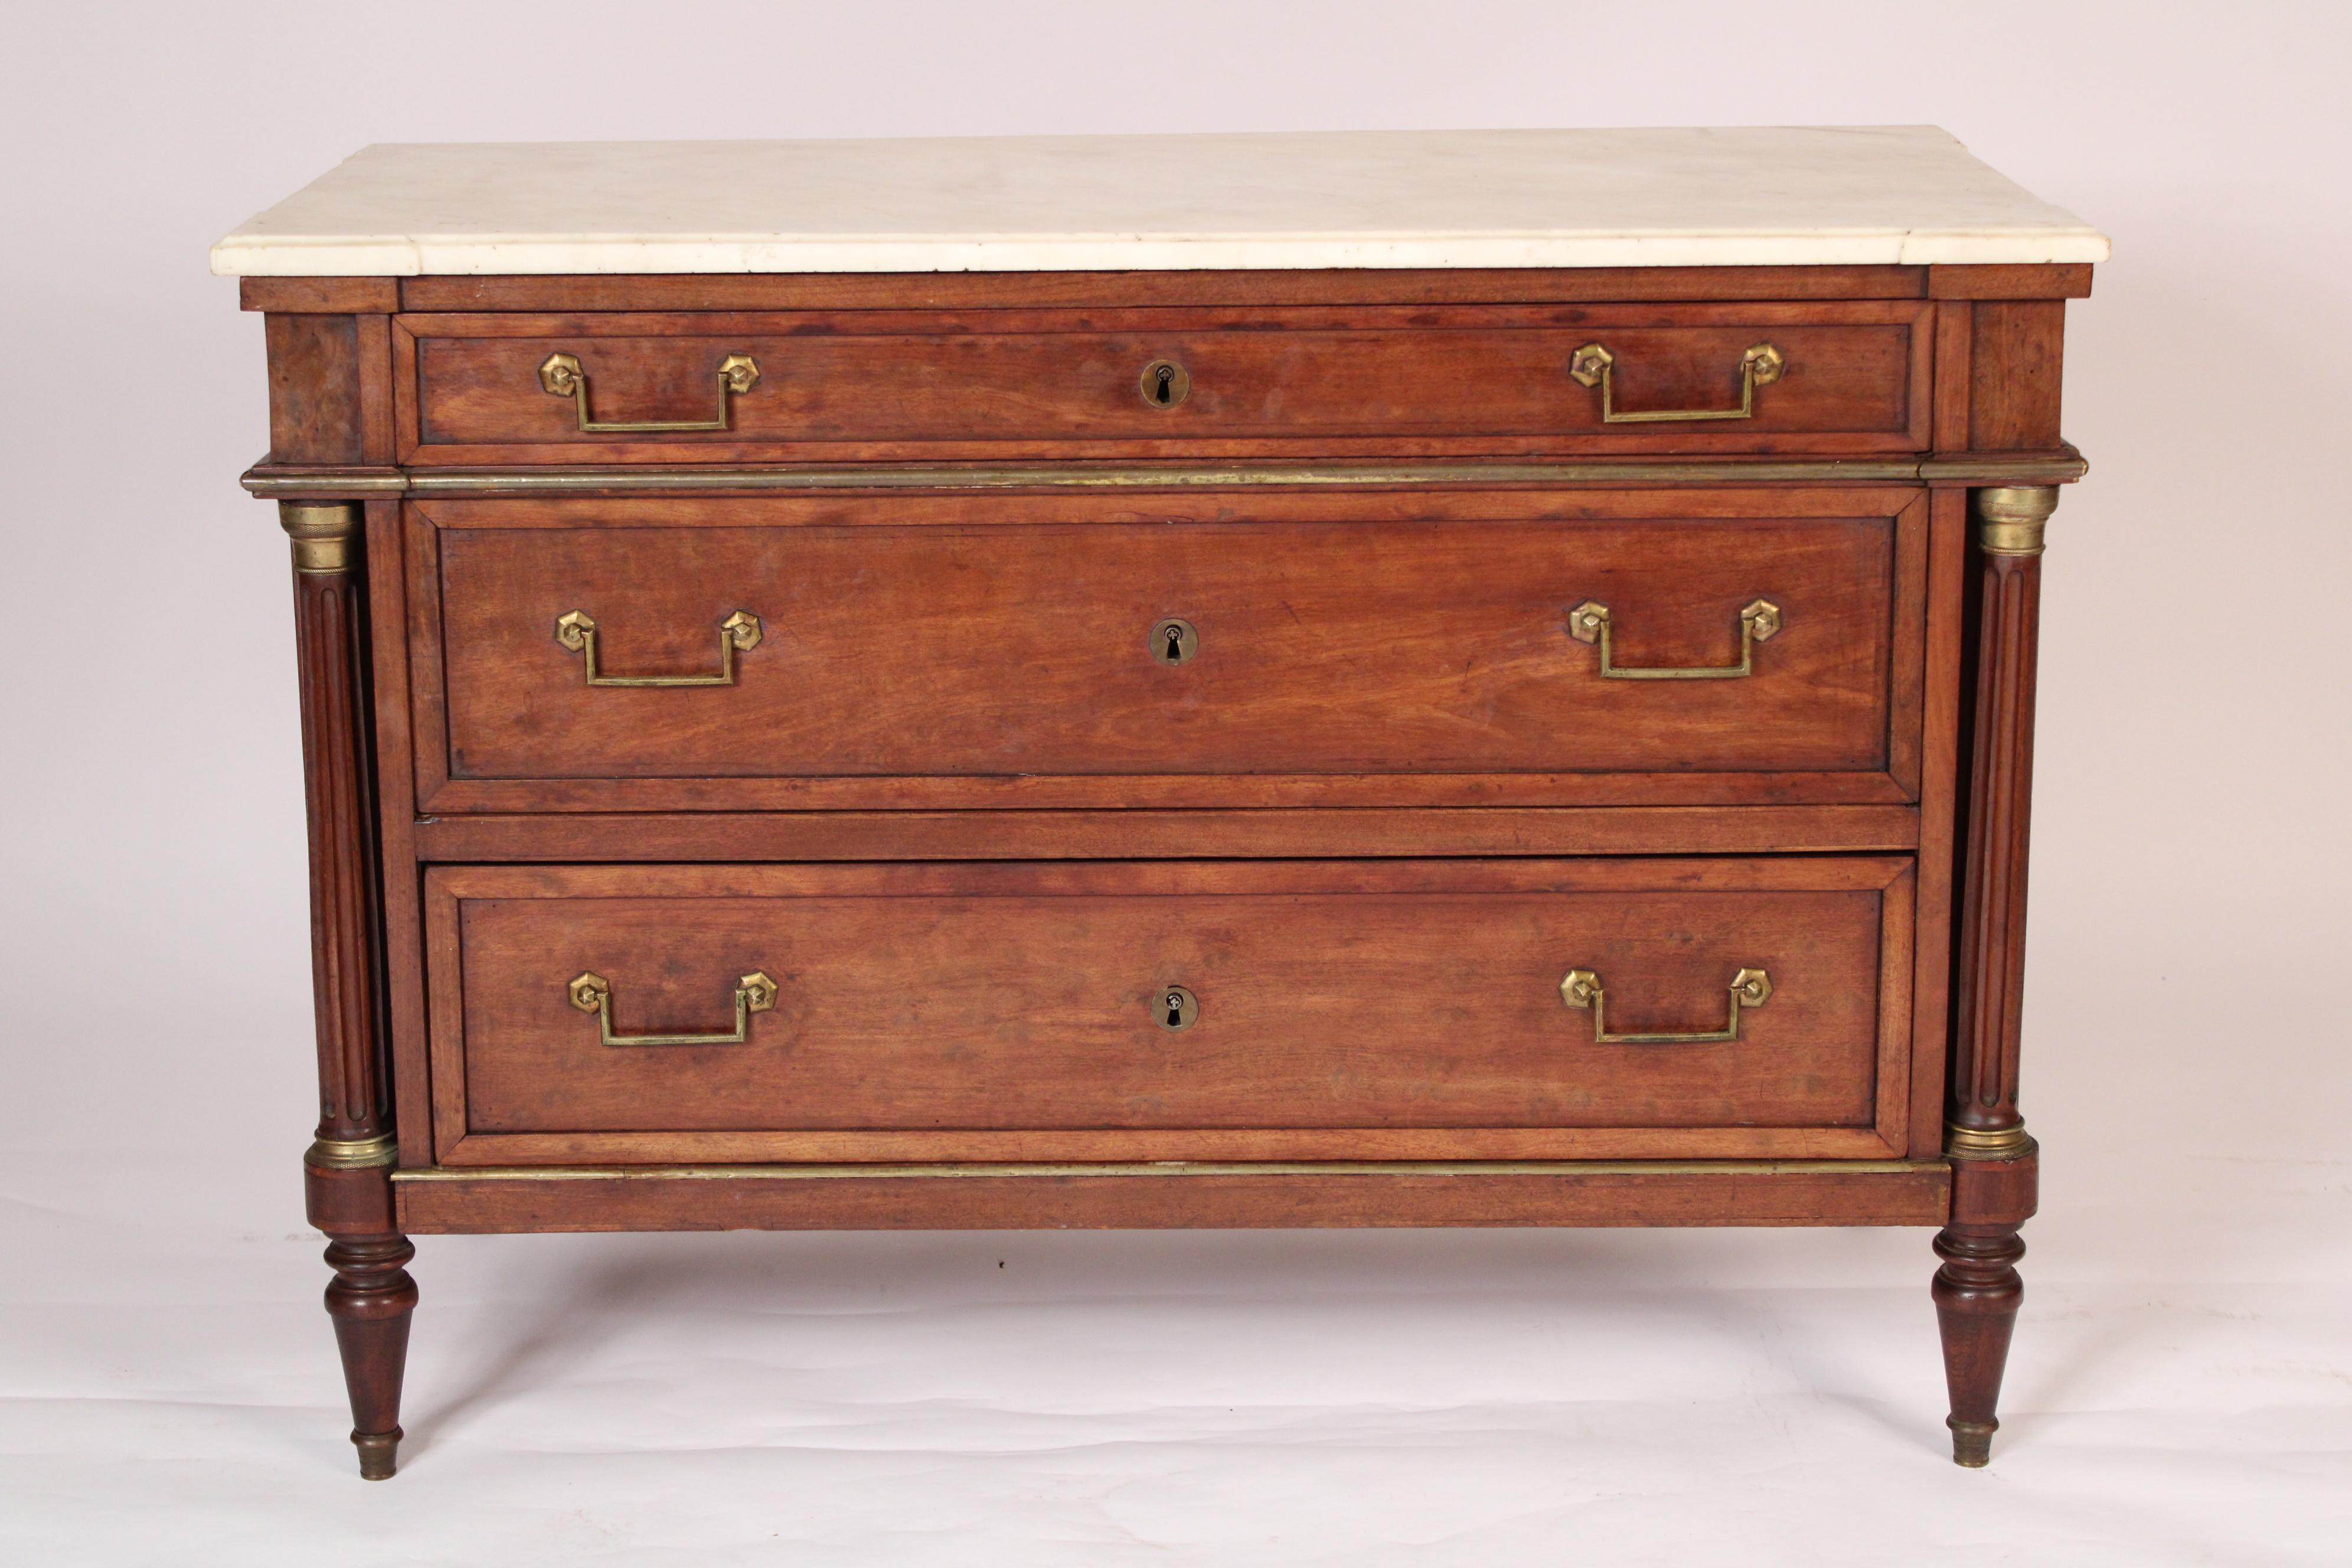 Antique Louis XVI style mahogany chest of drawers with marble top and brass moldings, 19th century. With a rectangular white marble top with molded front and side edges, 3 mahogany drawers with brass pulls, flanked by fluted mahogany columns with